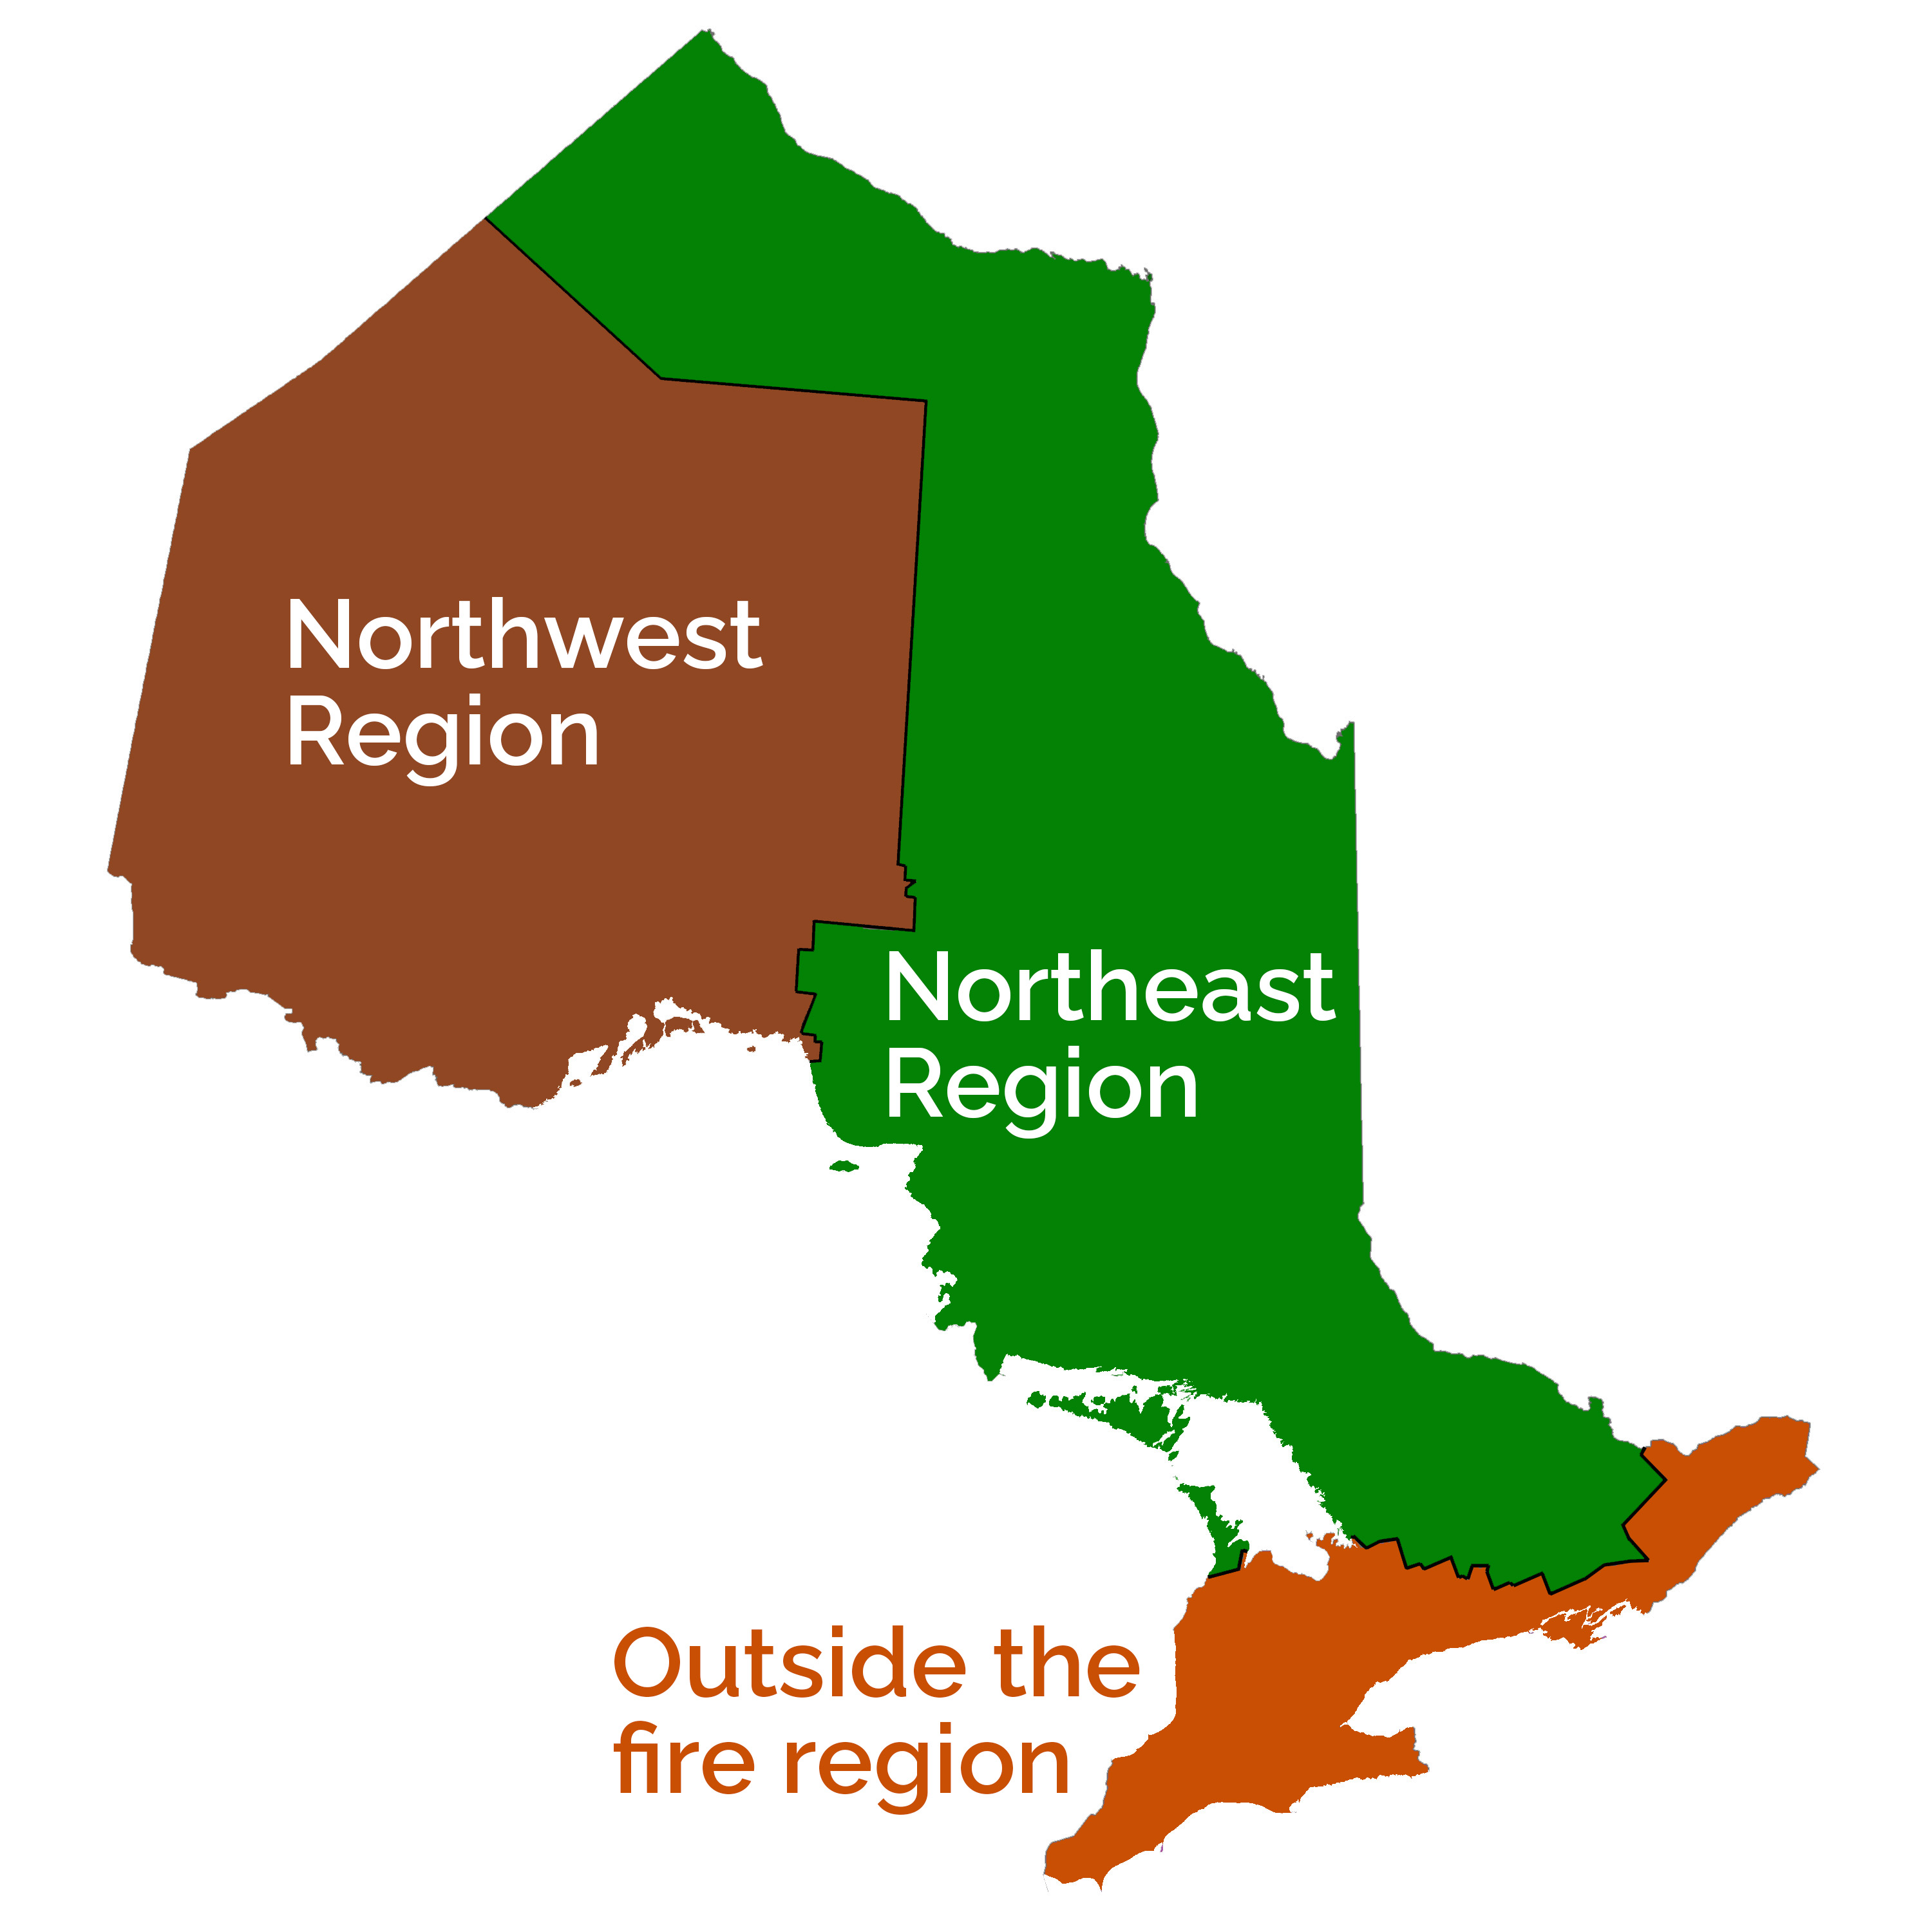 The northwest region is north and west of Sault Saint Marie, the east region is east of Sault Saint Marie, areas south of Owen Sound and Ottawa are outside the fire region.